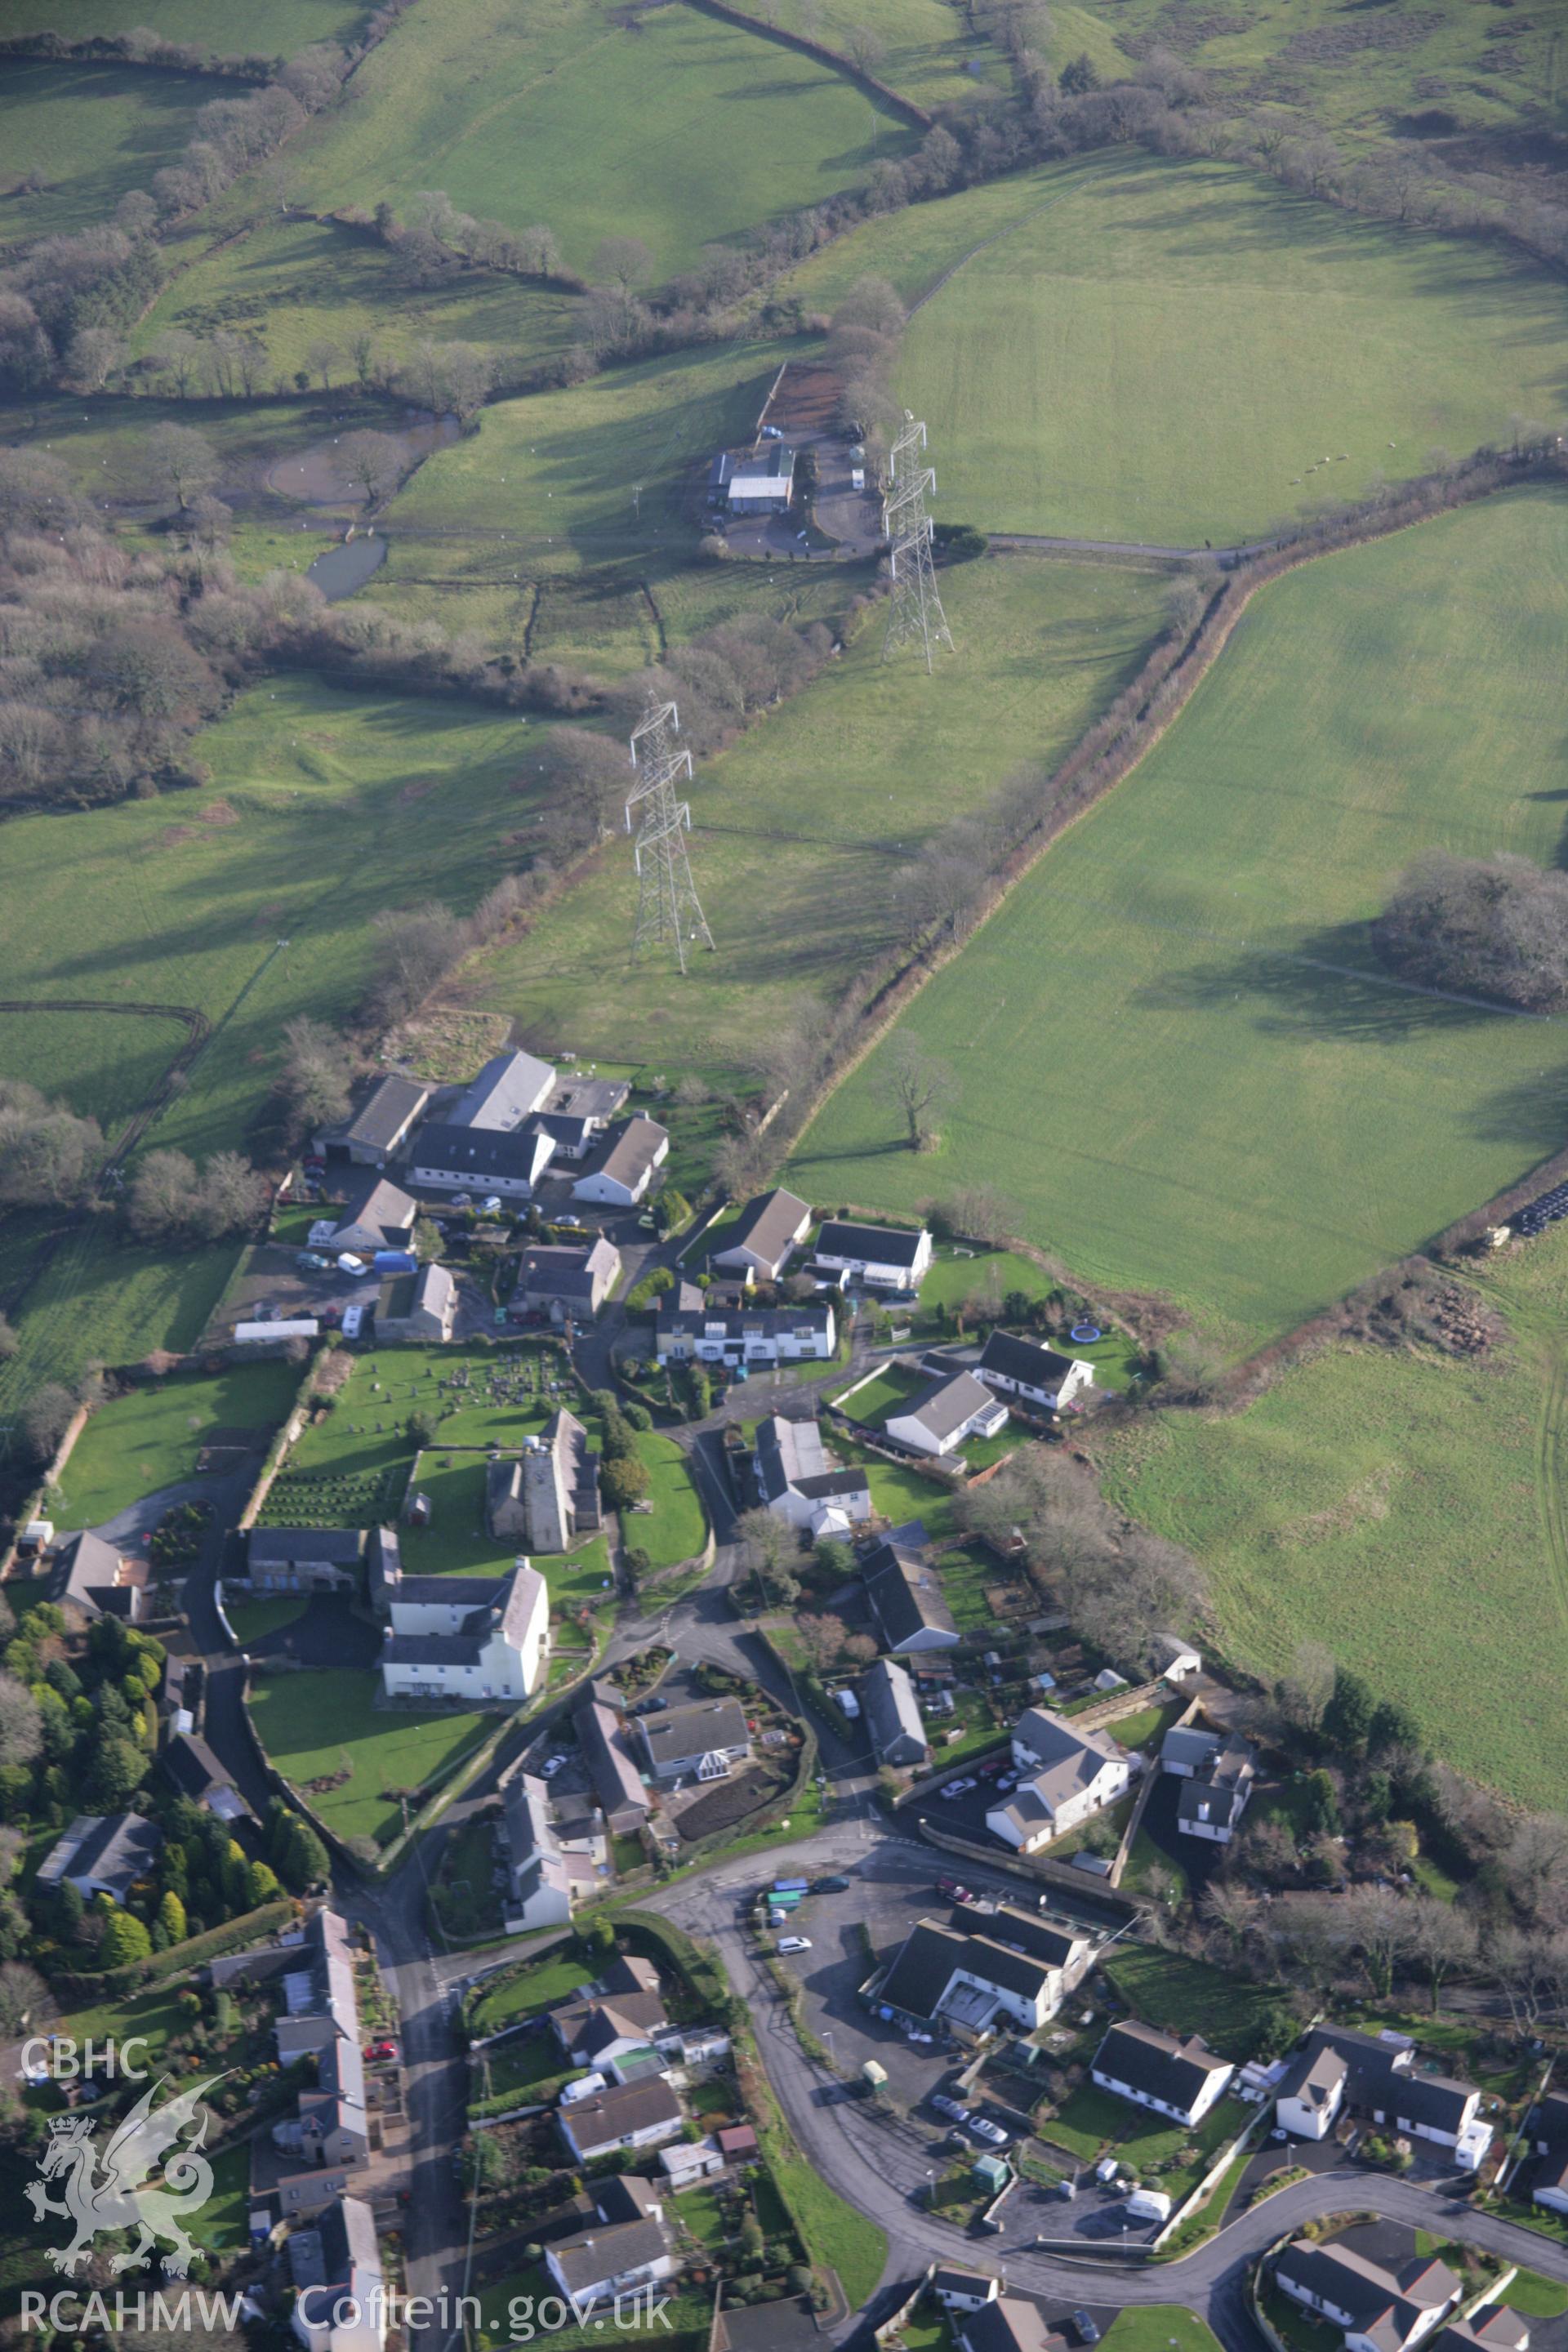 RCAHMW colour oblique aerial photograph of Jeffreyston village, viewed from the west. Taken on 11 January 2006 by Toby Driver.